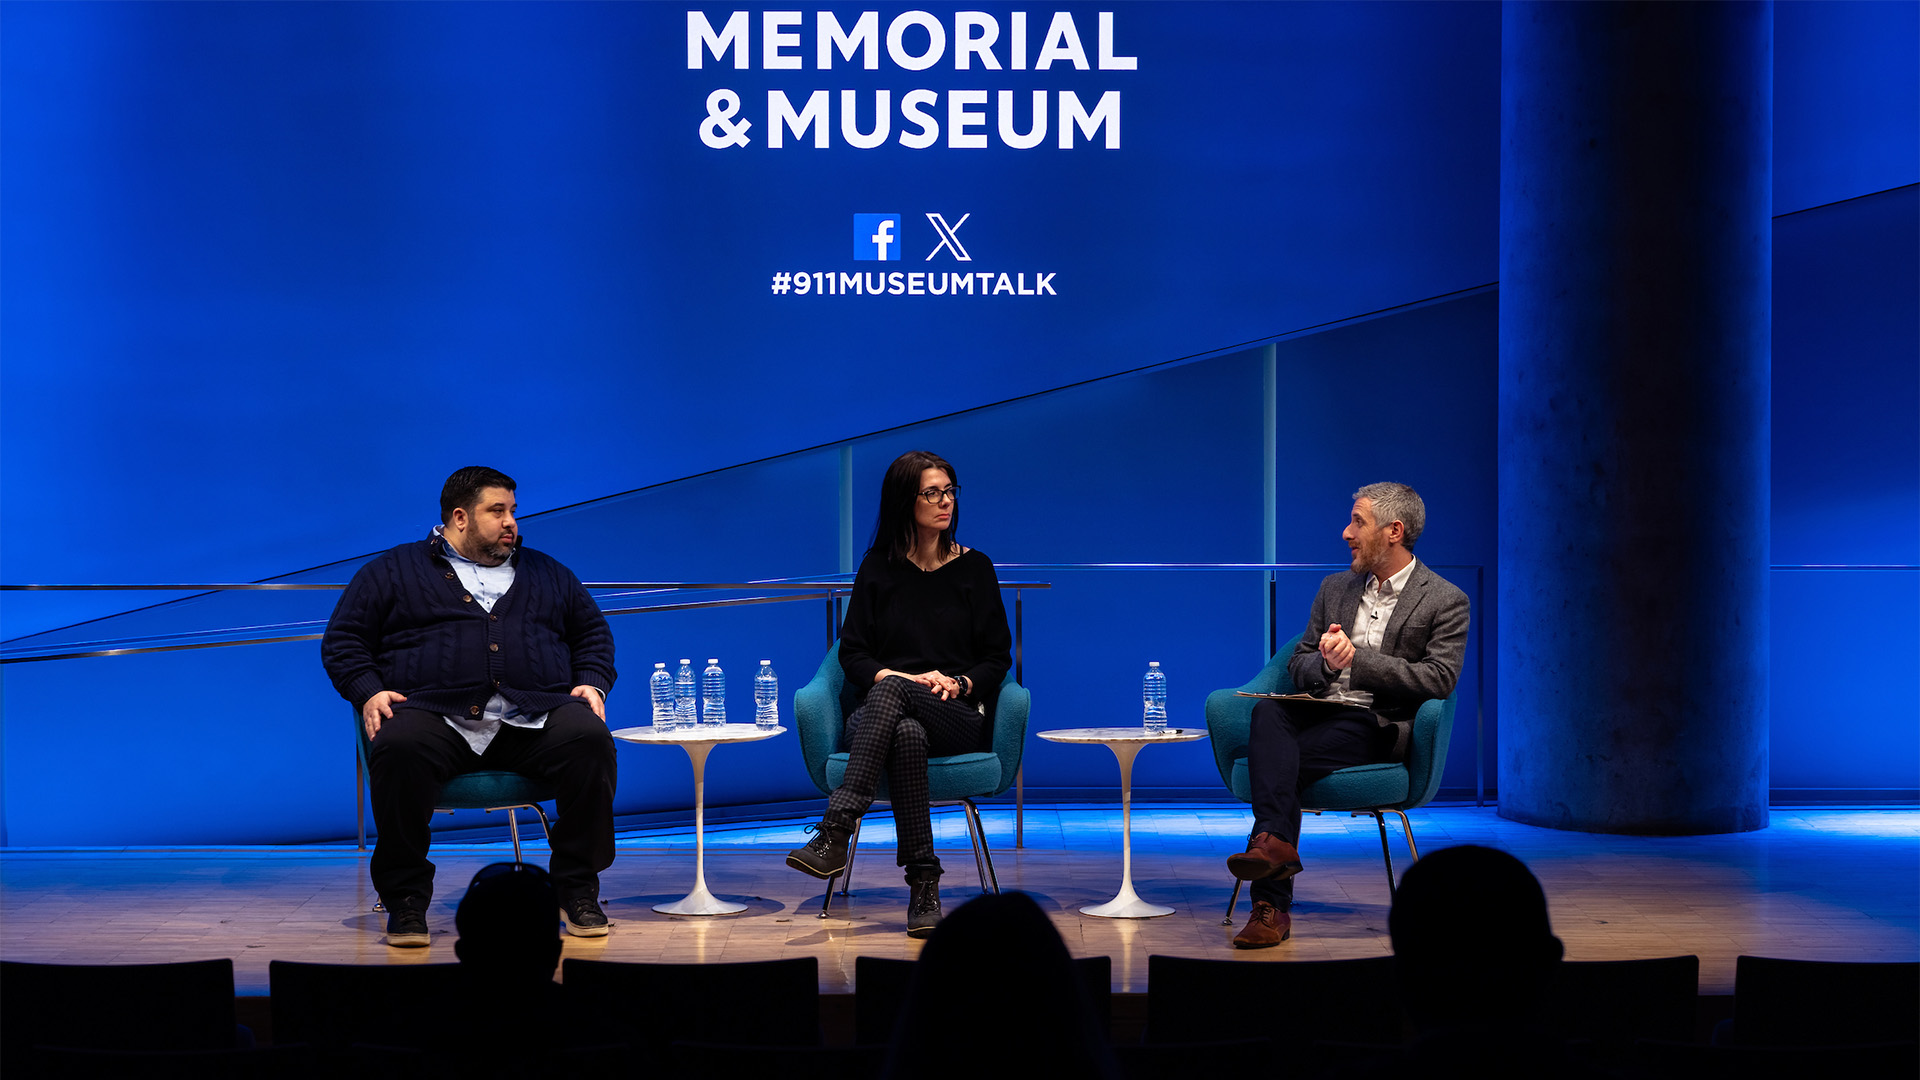 Three speakers, sitting on stage against a blue background displaying the 9/11 Memorial and Museum logo.